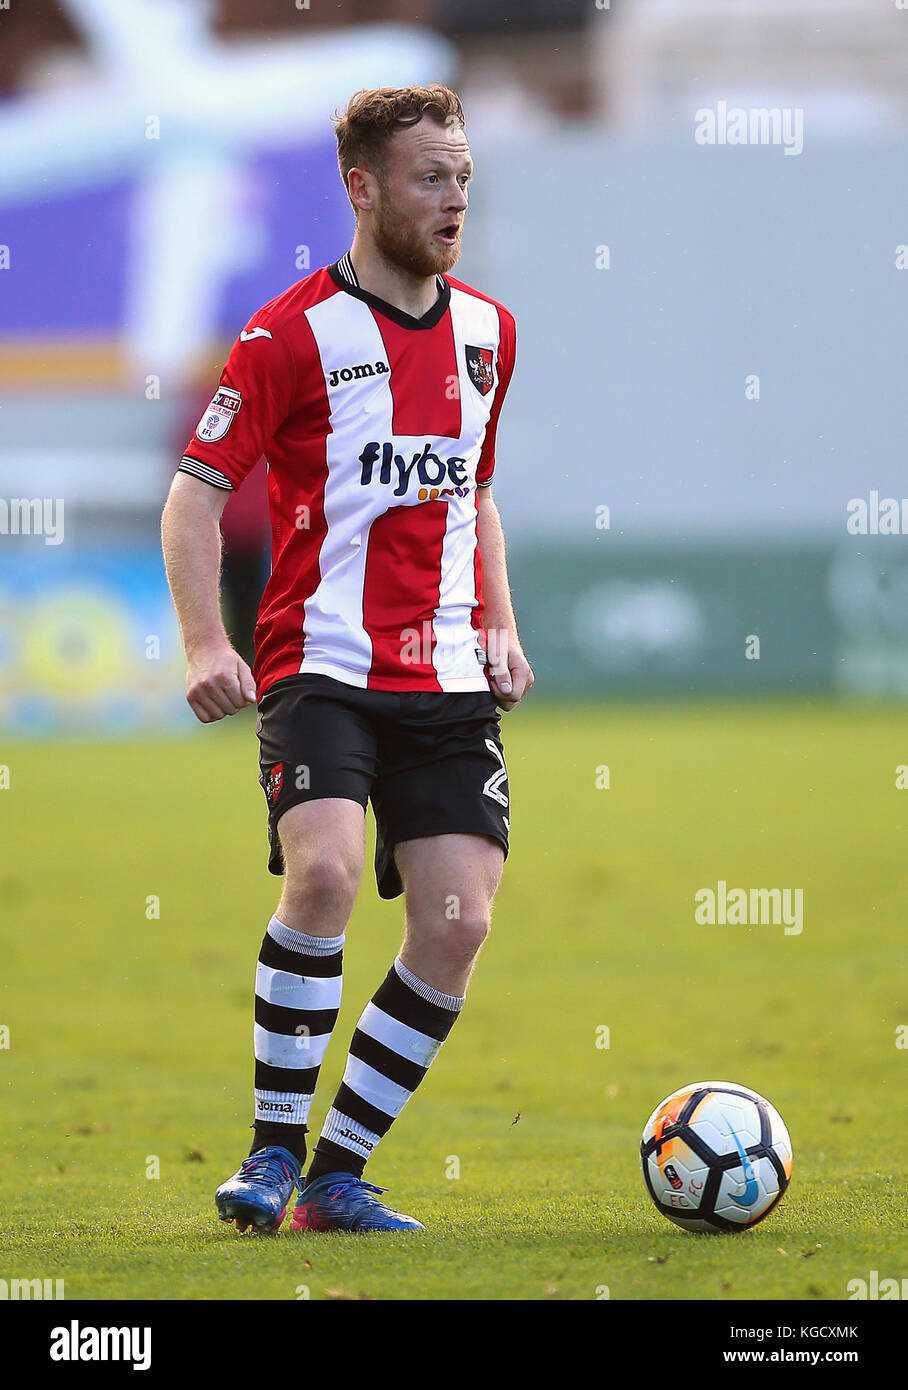 Exeter's Jake Taylor on the ball during the Emirates FA Cup, First Round match at St James Park, Exeter. PRESS ASSOCIATION Photo. Picture date: Sunday November 5, 2017. See PA story SOCCER Exeter. Photo credit should read: Mark Kerton/PA Wire. RESTRICTIONS: No use with unauthorised audio, video, data, fixture lists, club/league logos or 'live' services. Online in-match use limited to 75 images, no video emulation. No use in betting, games or single club/league/player publications. Stock Photo